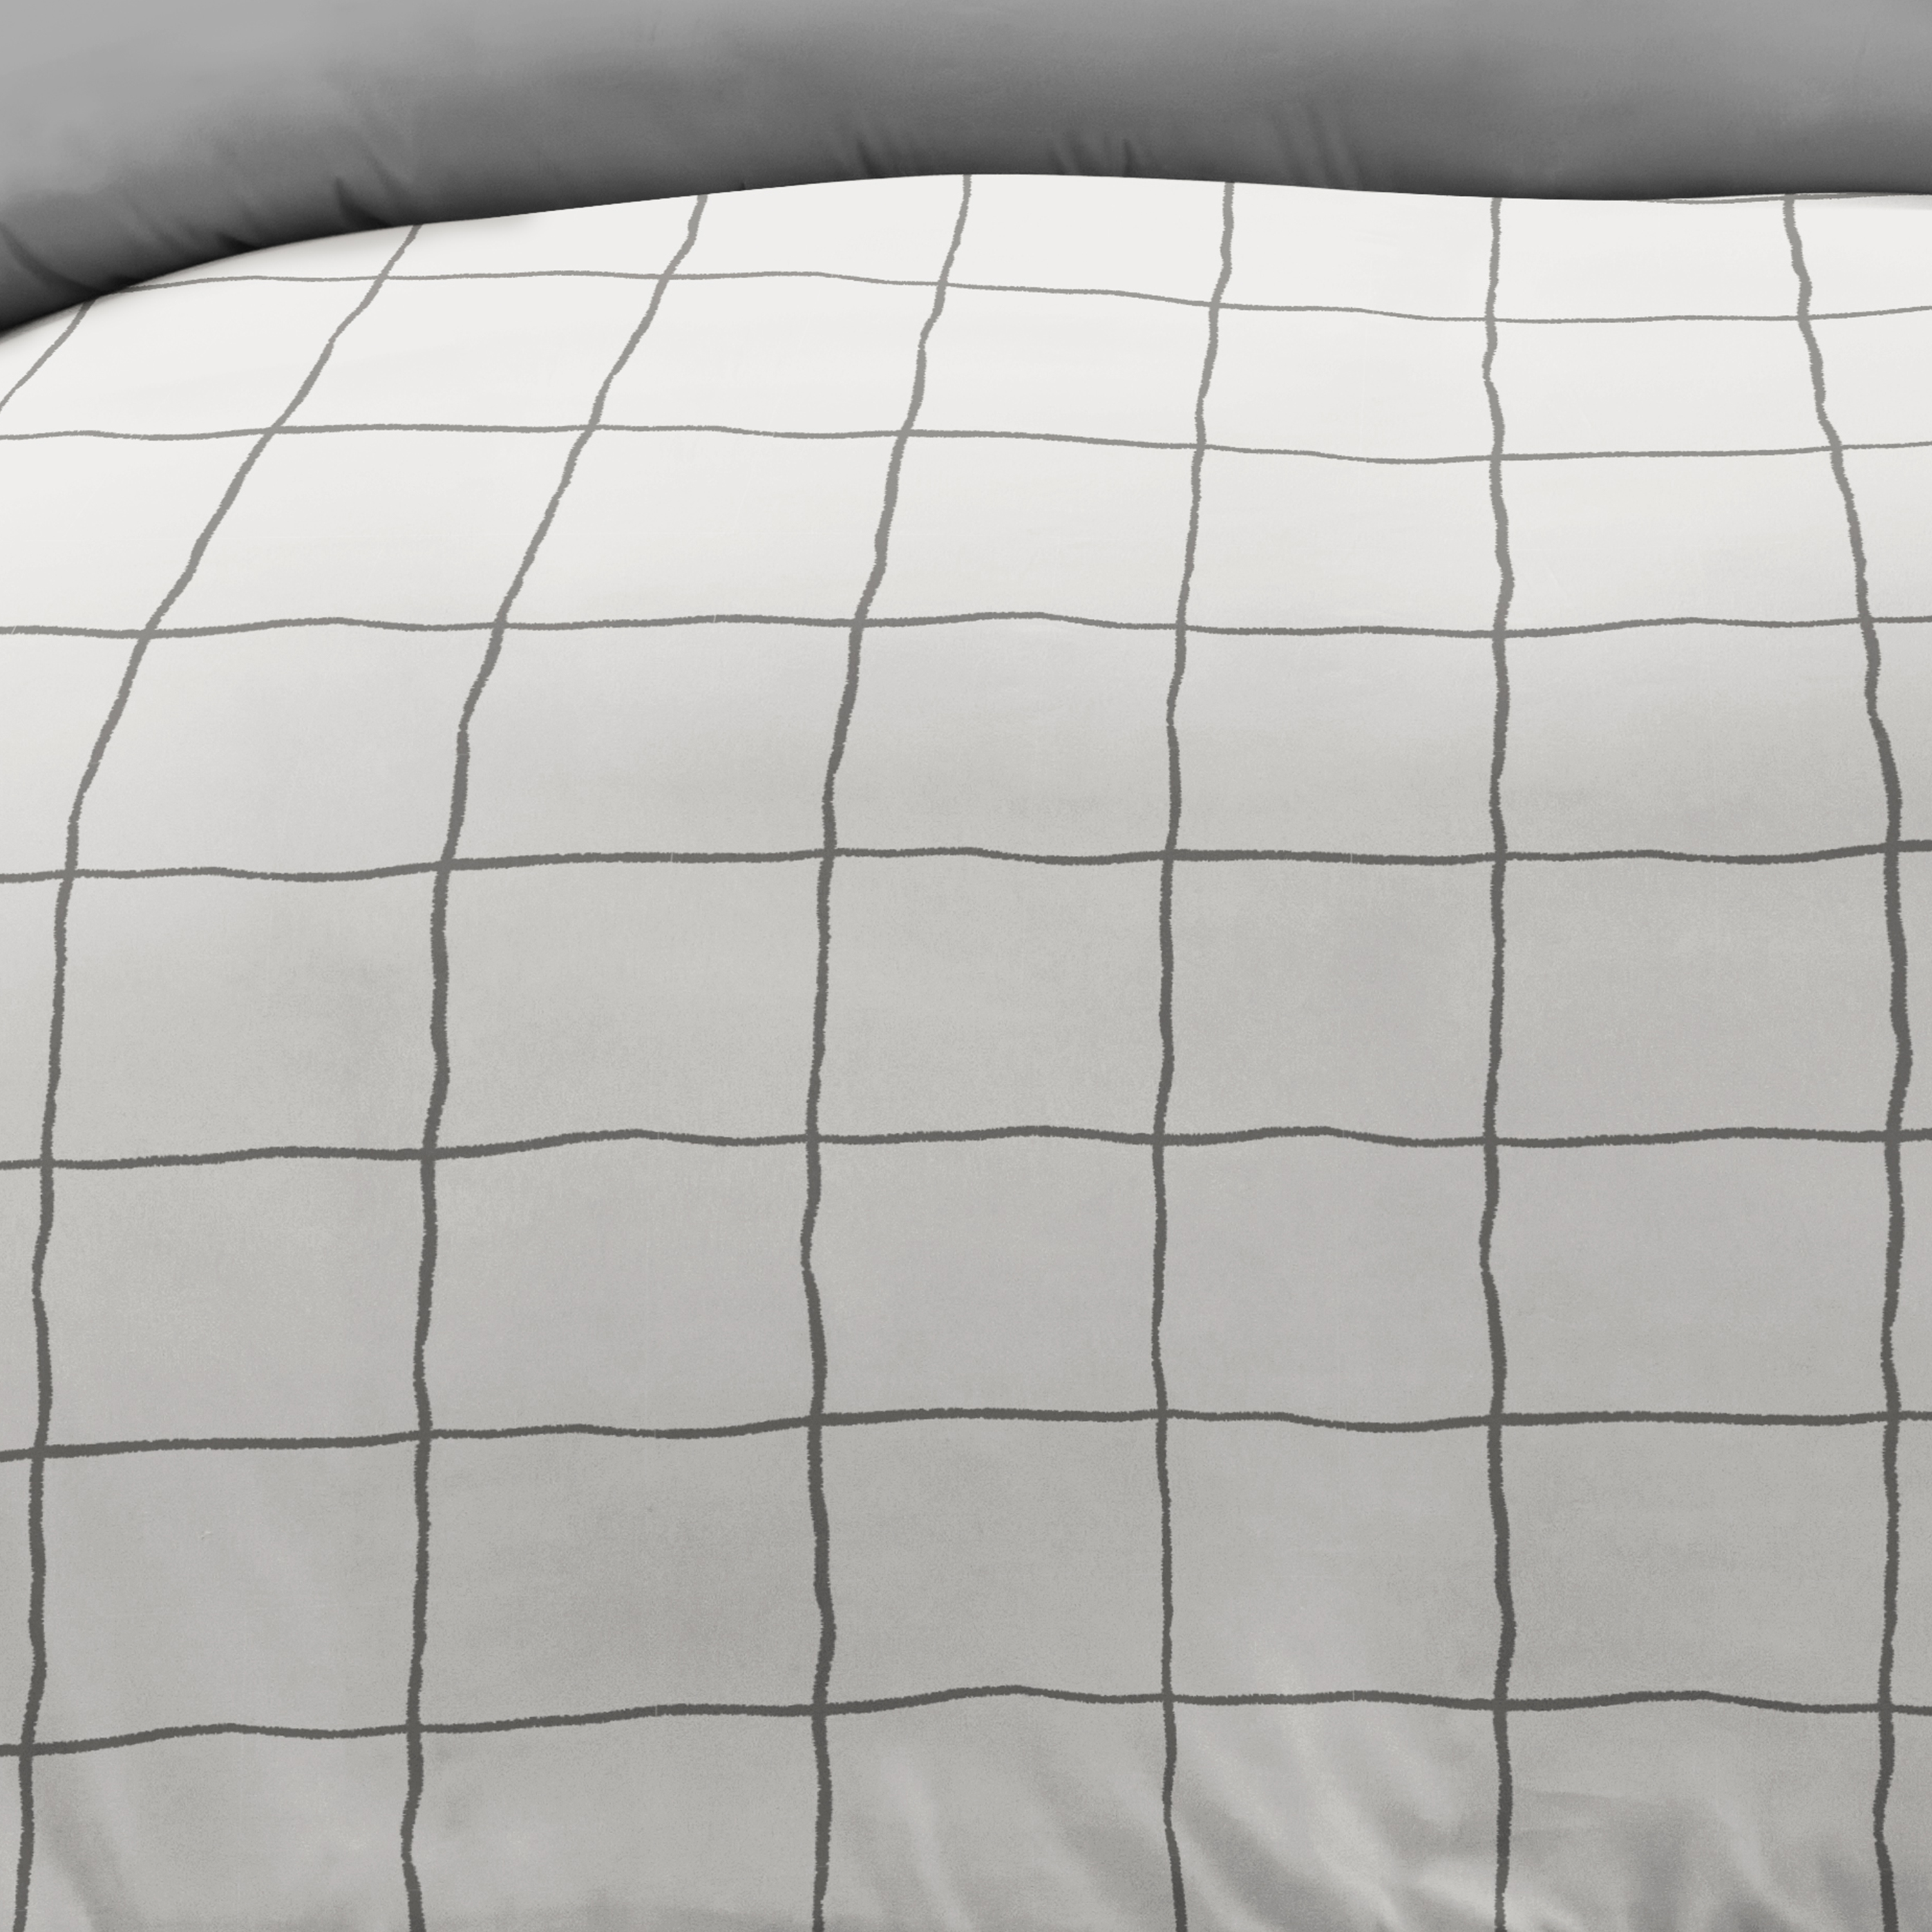 Made Supply Co. 2 Piece Hypoallergenic Oversized Grid Print Comforter Set with Shams, Twin/Twin XL - image 3 of 4